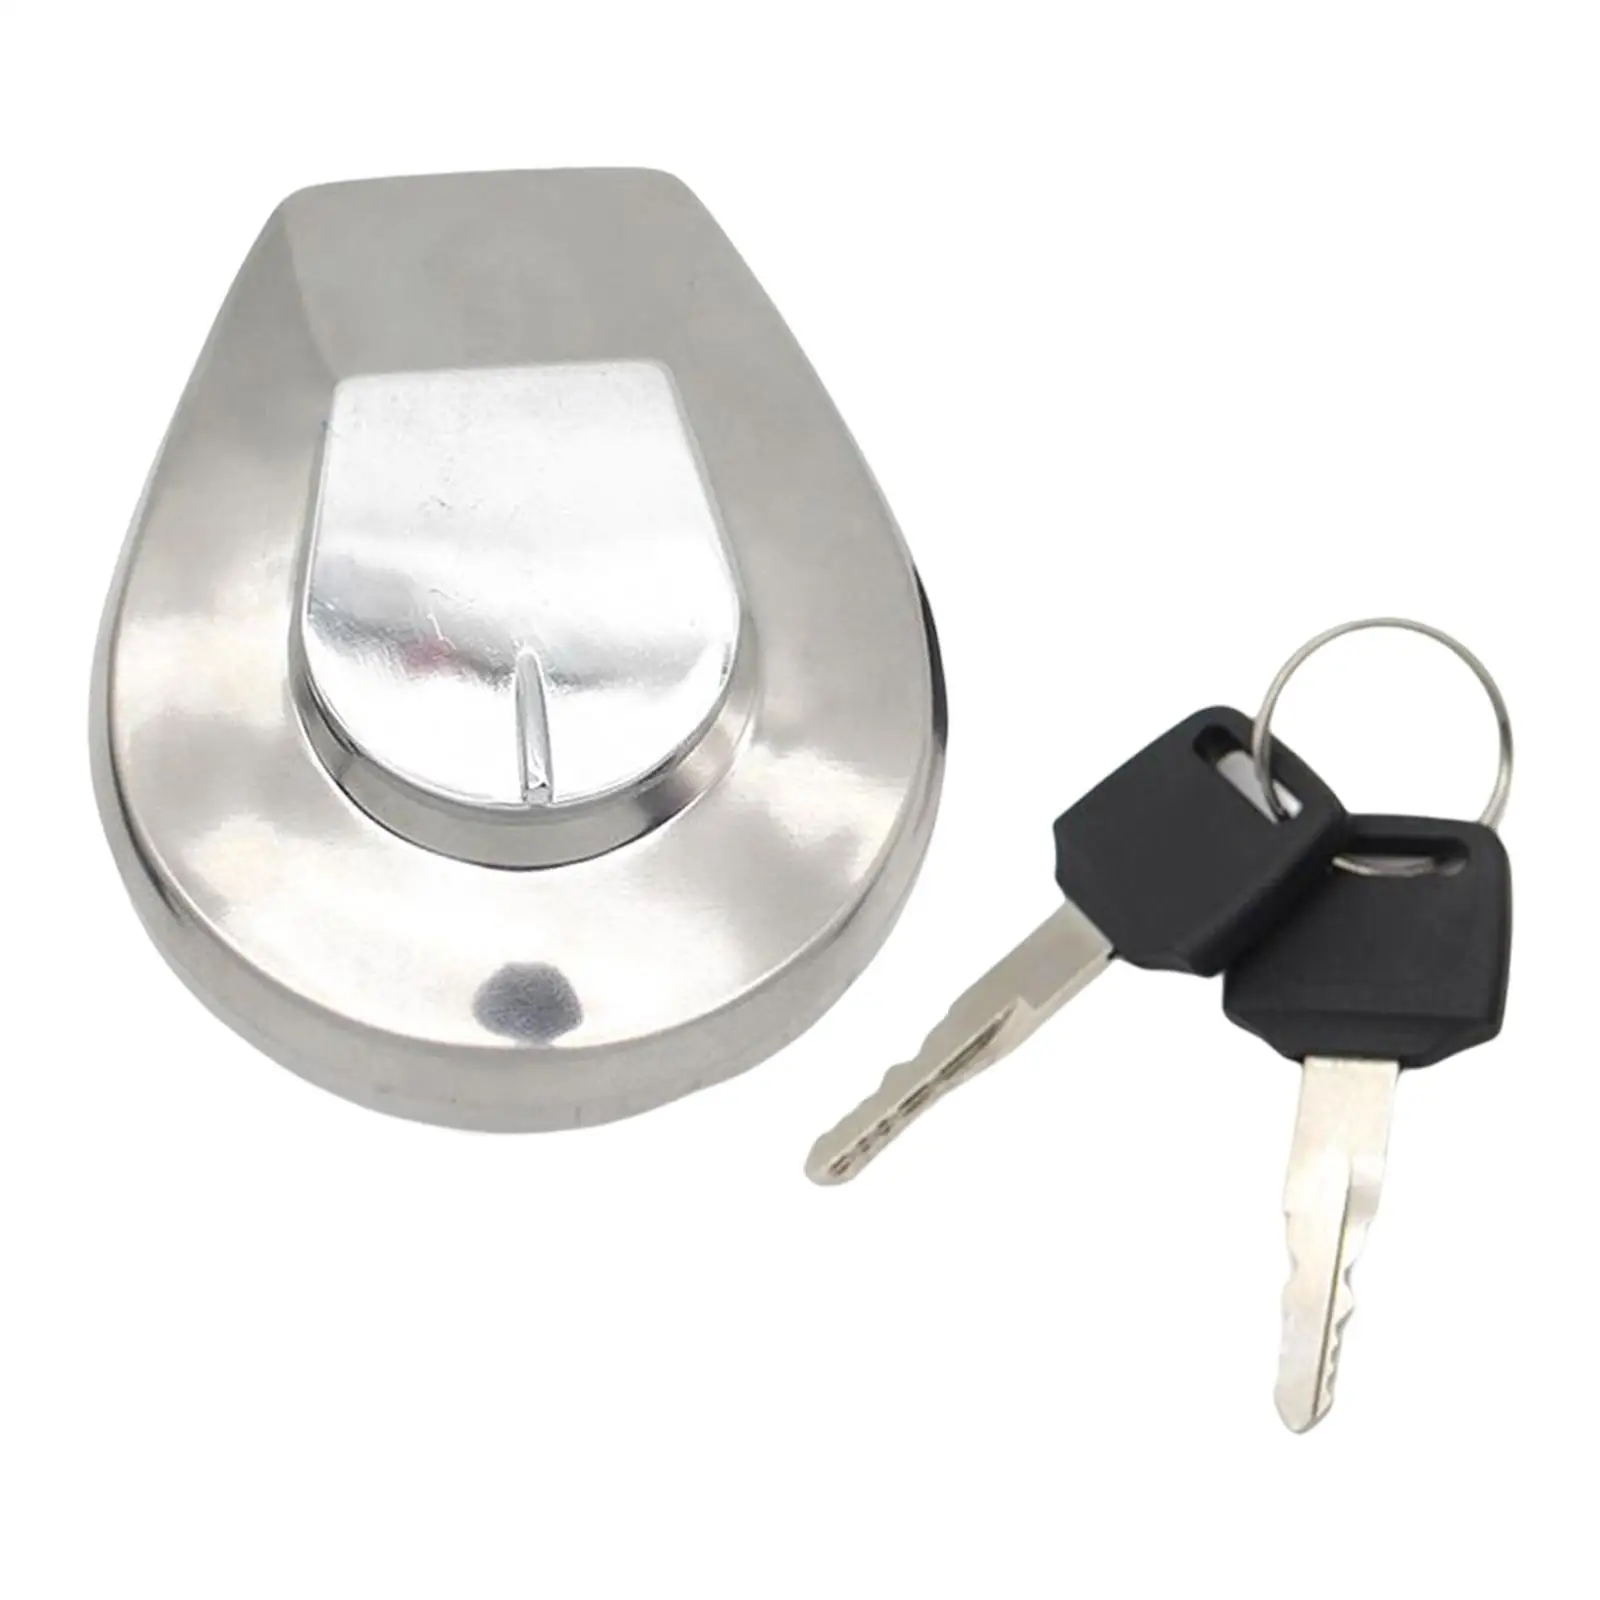 Motorbike Oil Fuel Tank Gas Cap Cover with 2 Keys for  Vf750C GL1500CD CX650C Vf1100C CB750